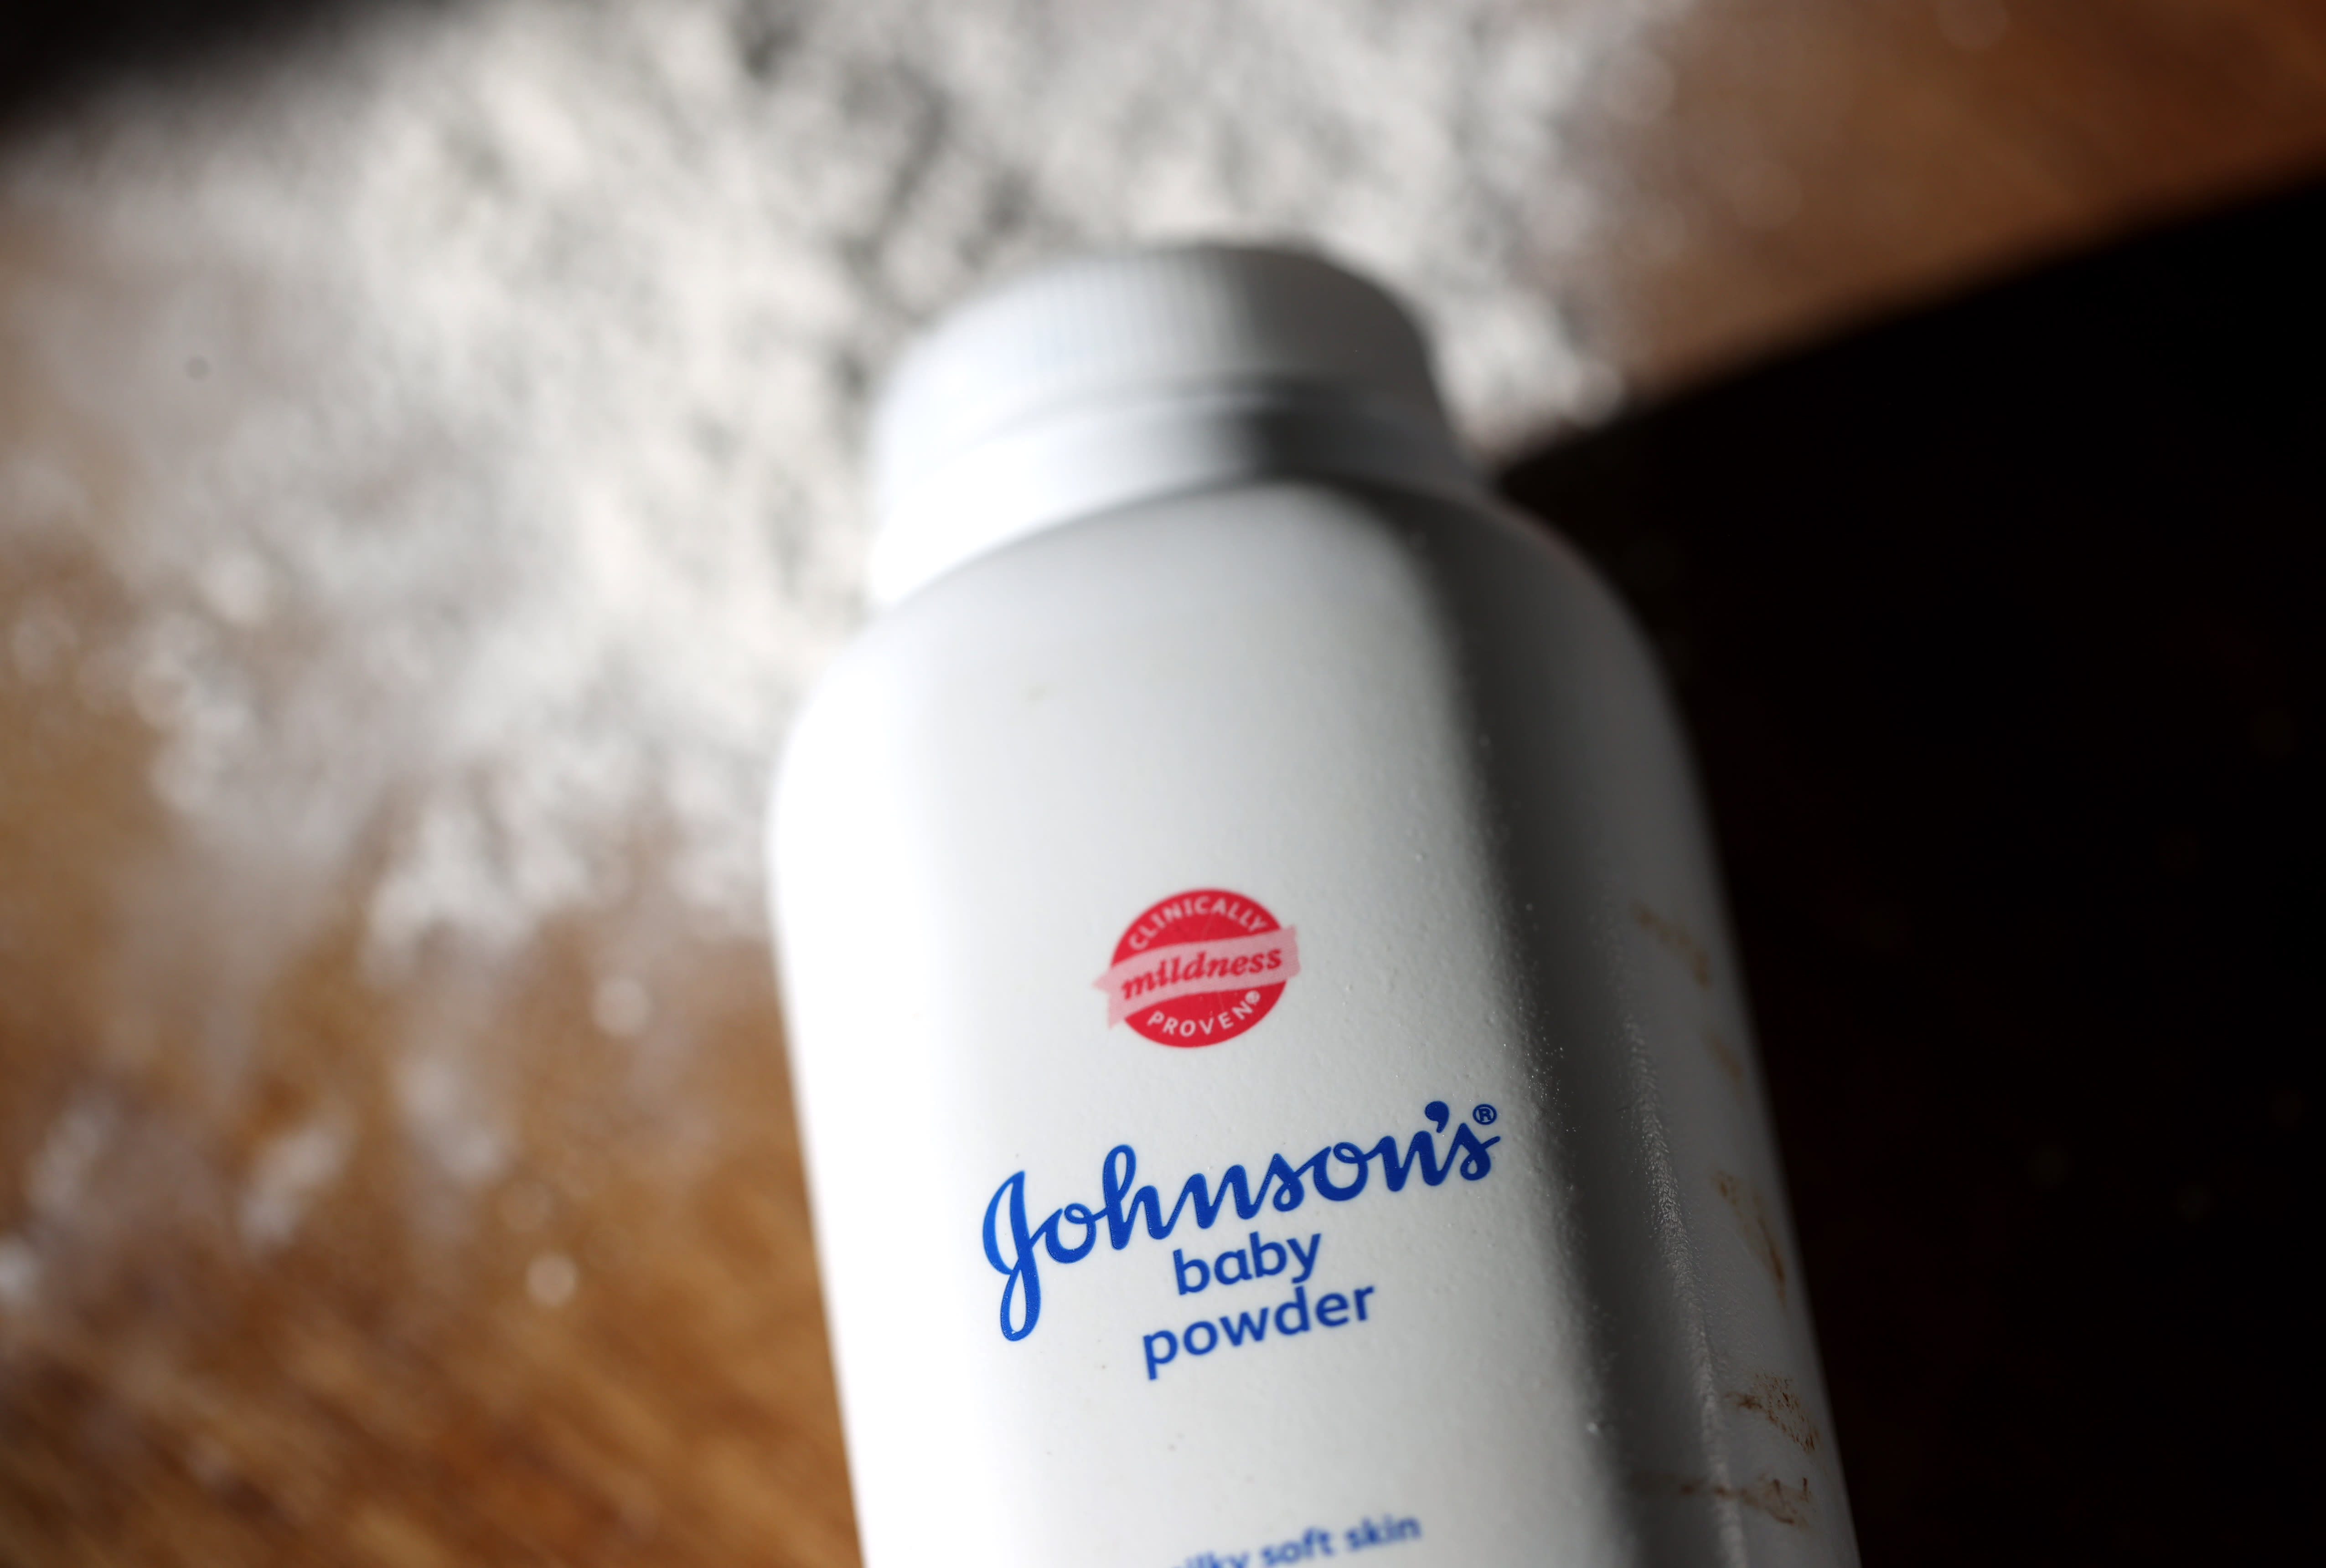 Two reasons why settling JNJ's baby powder litigation is great for shareholders